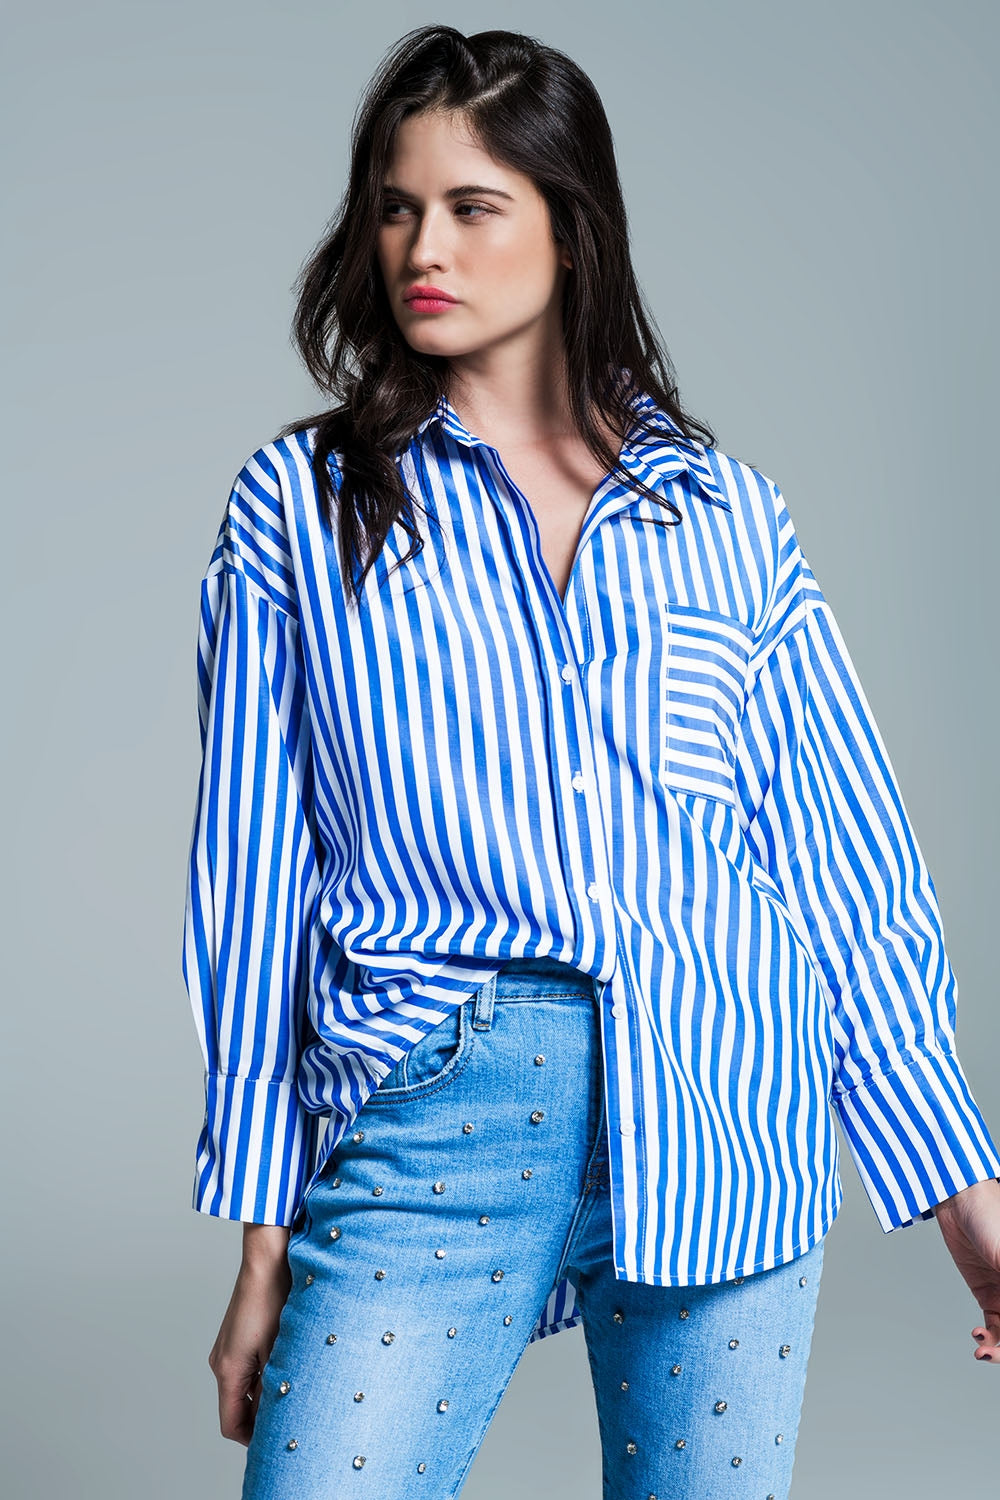 Q2 White oversized blouse with vertical stripes in blue and chest pocket